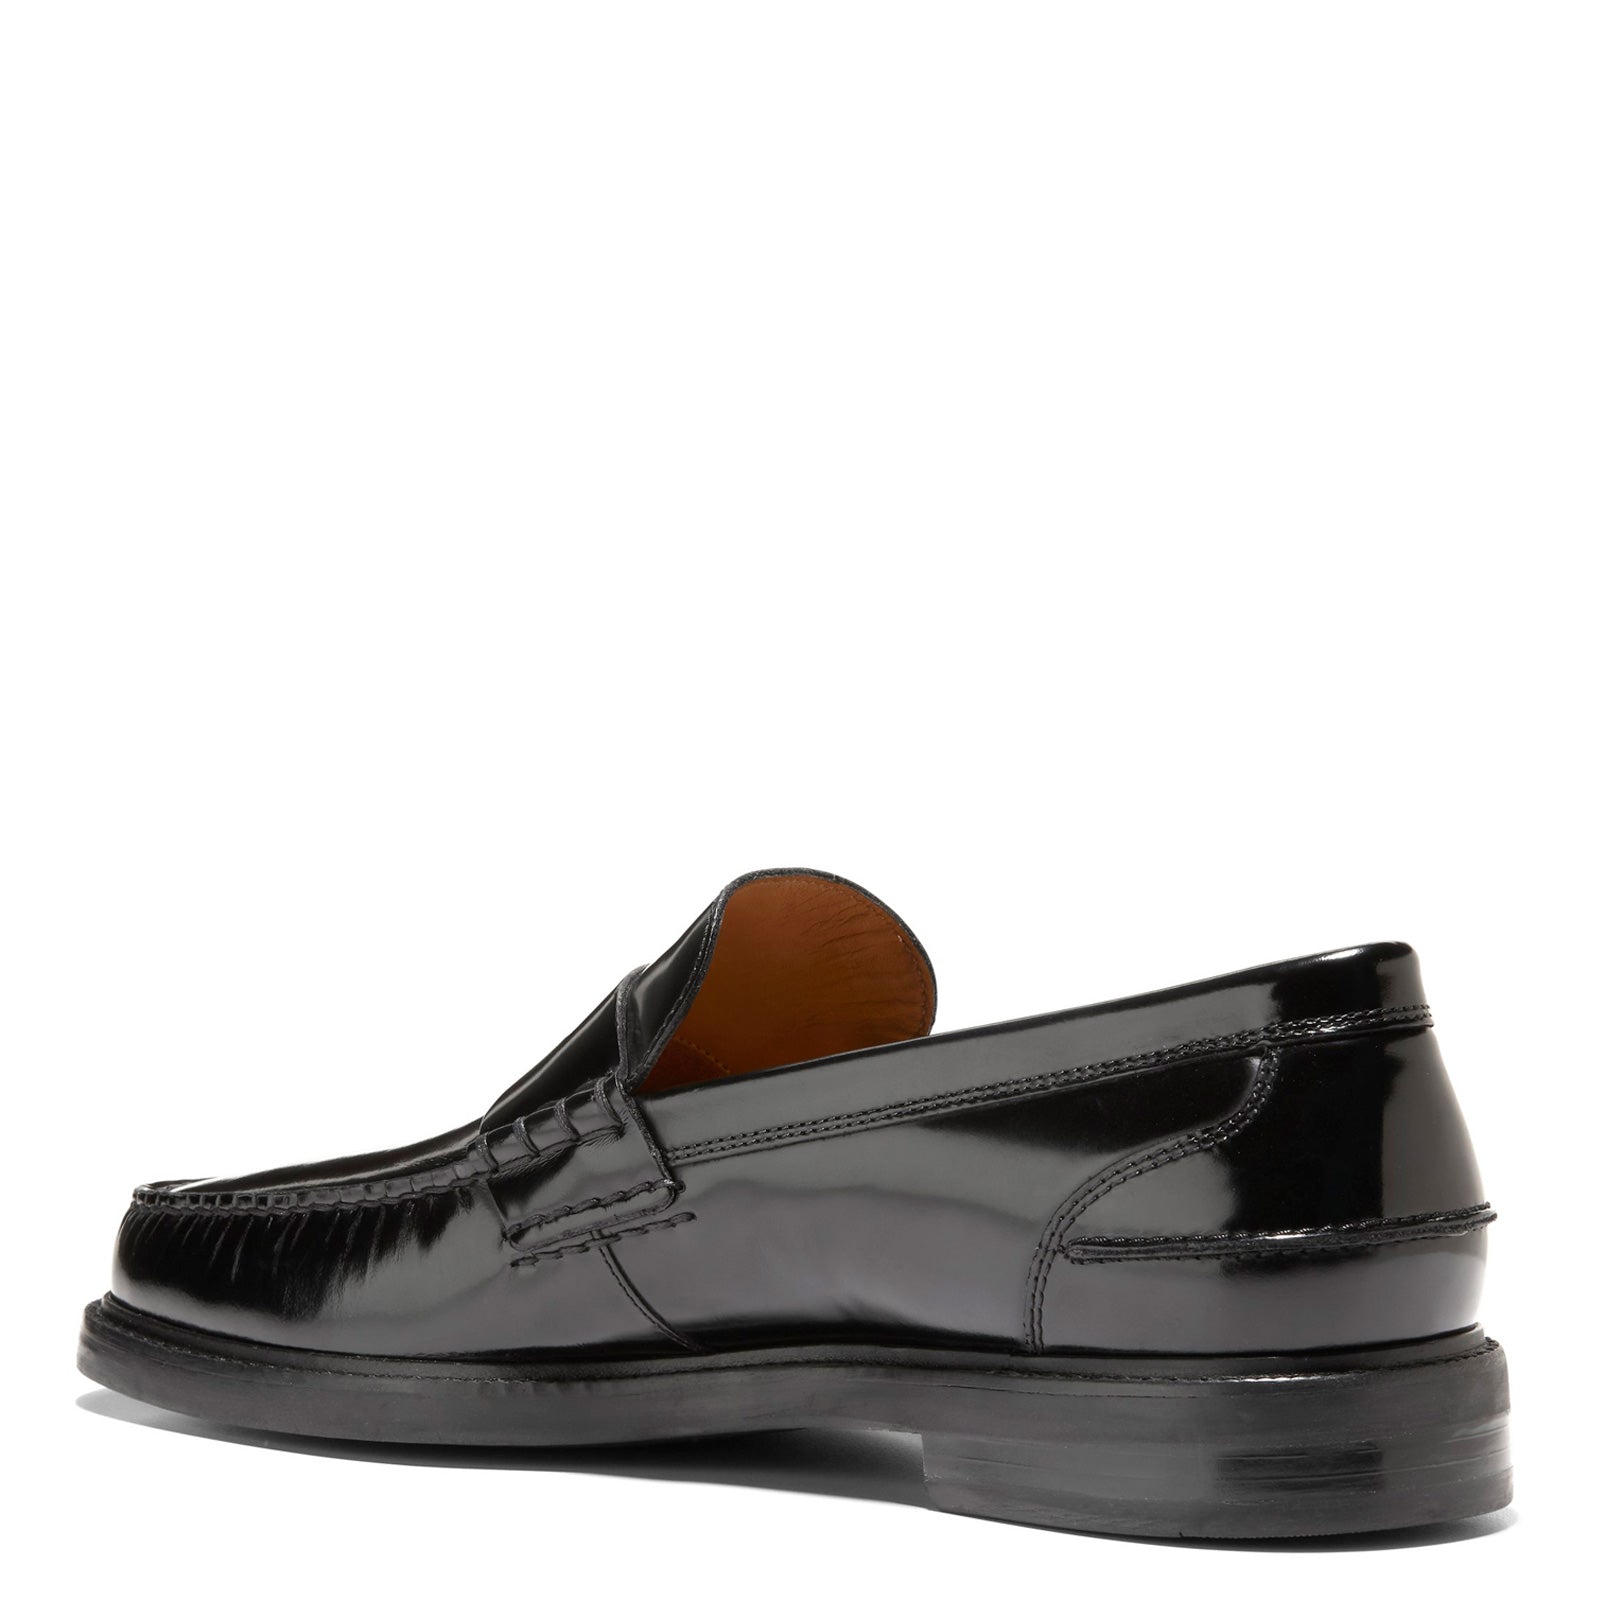 Men's Cole Haan, Pinch Prep Penny Loafer